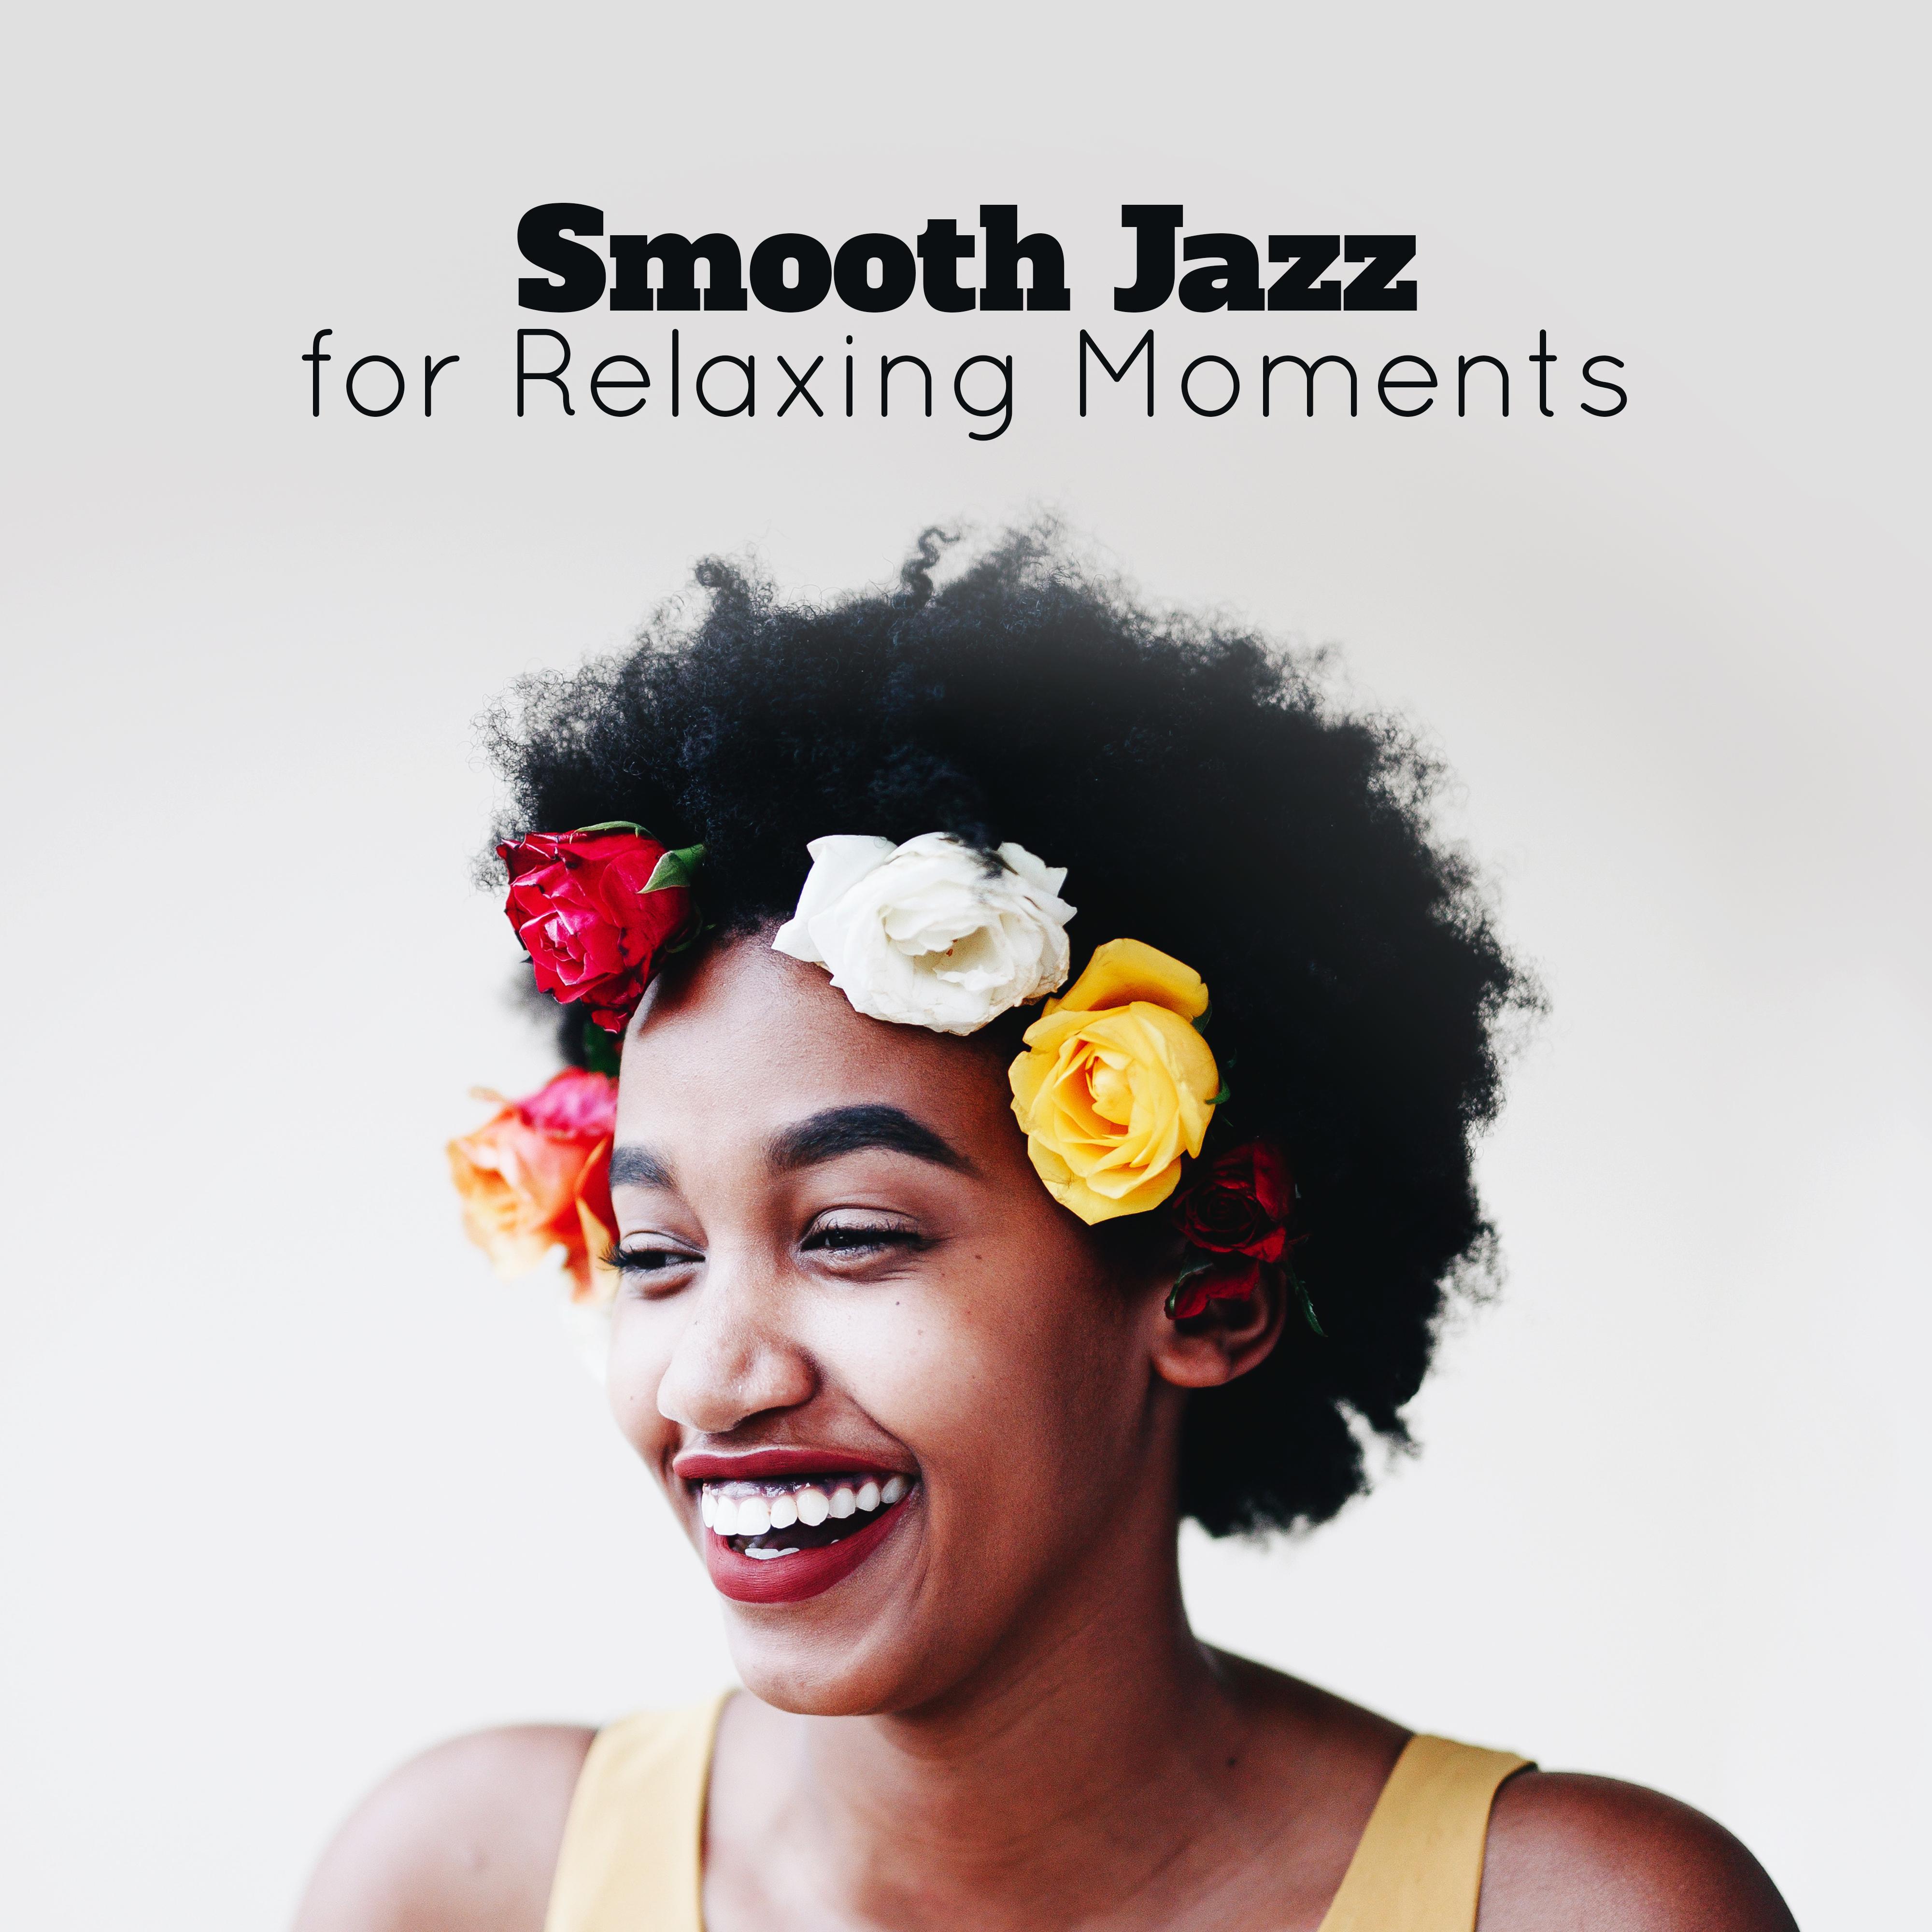 Smooth Jazz for Relaxing Moments